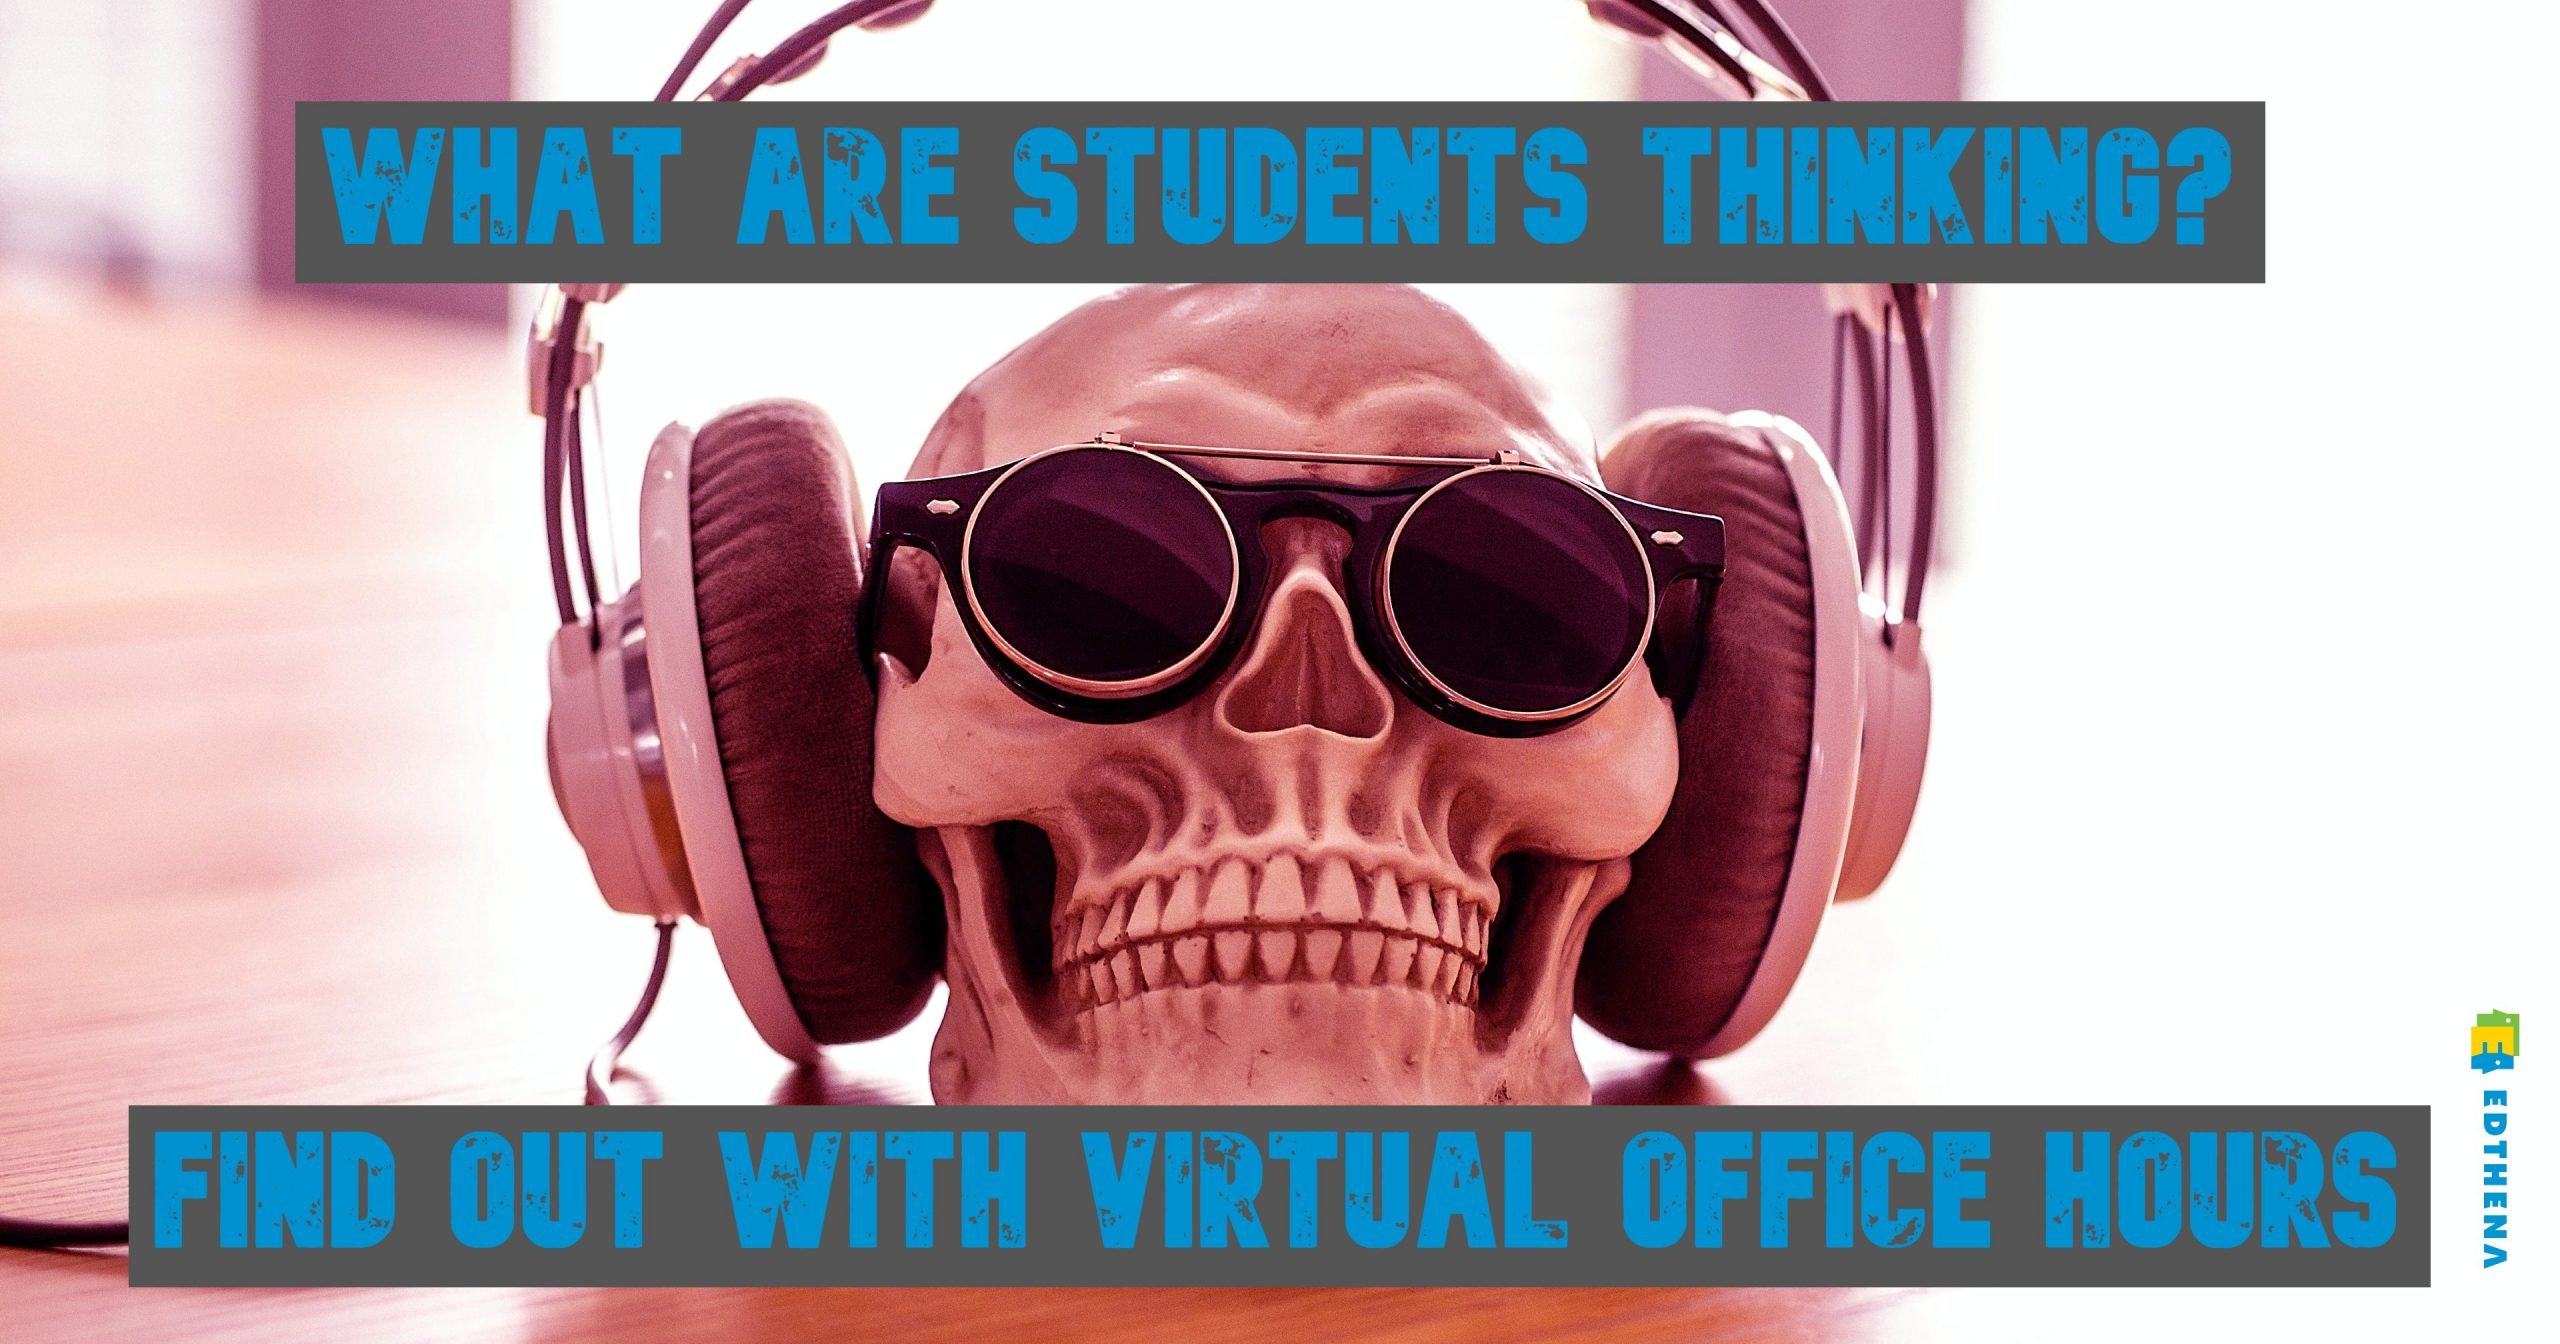 online office hours can reveal student thinking via more student talk. this is valuable for instructional coaching